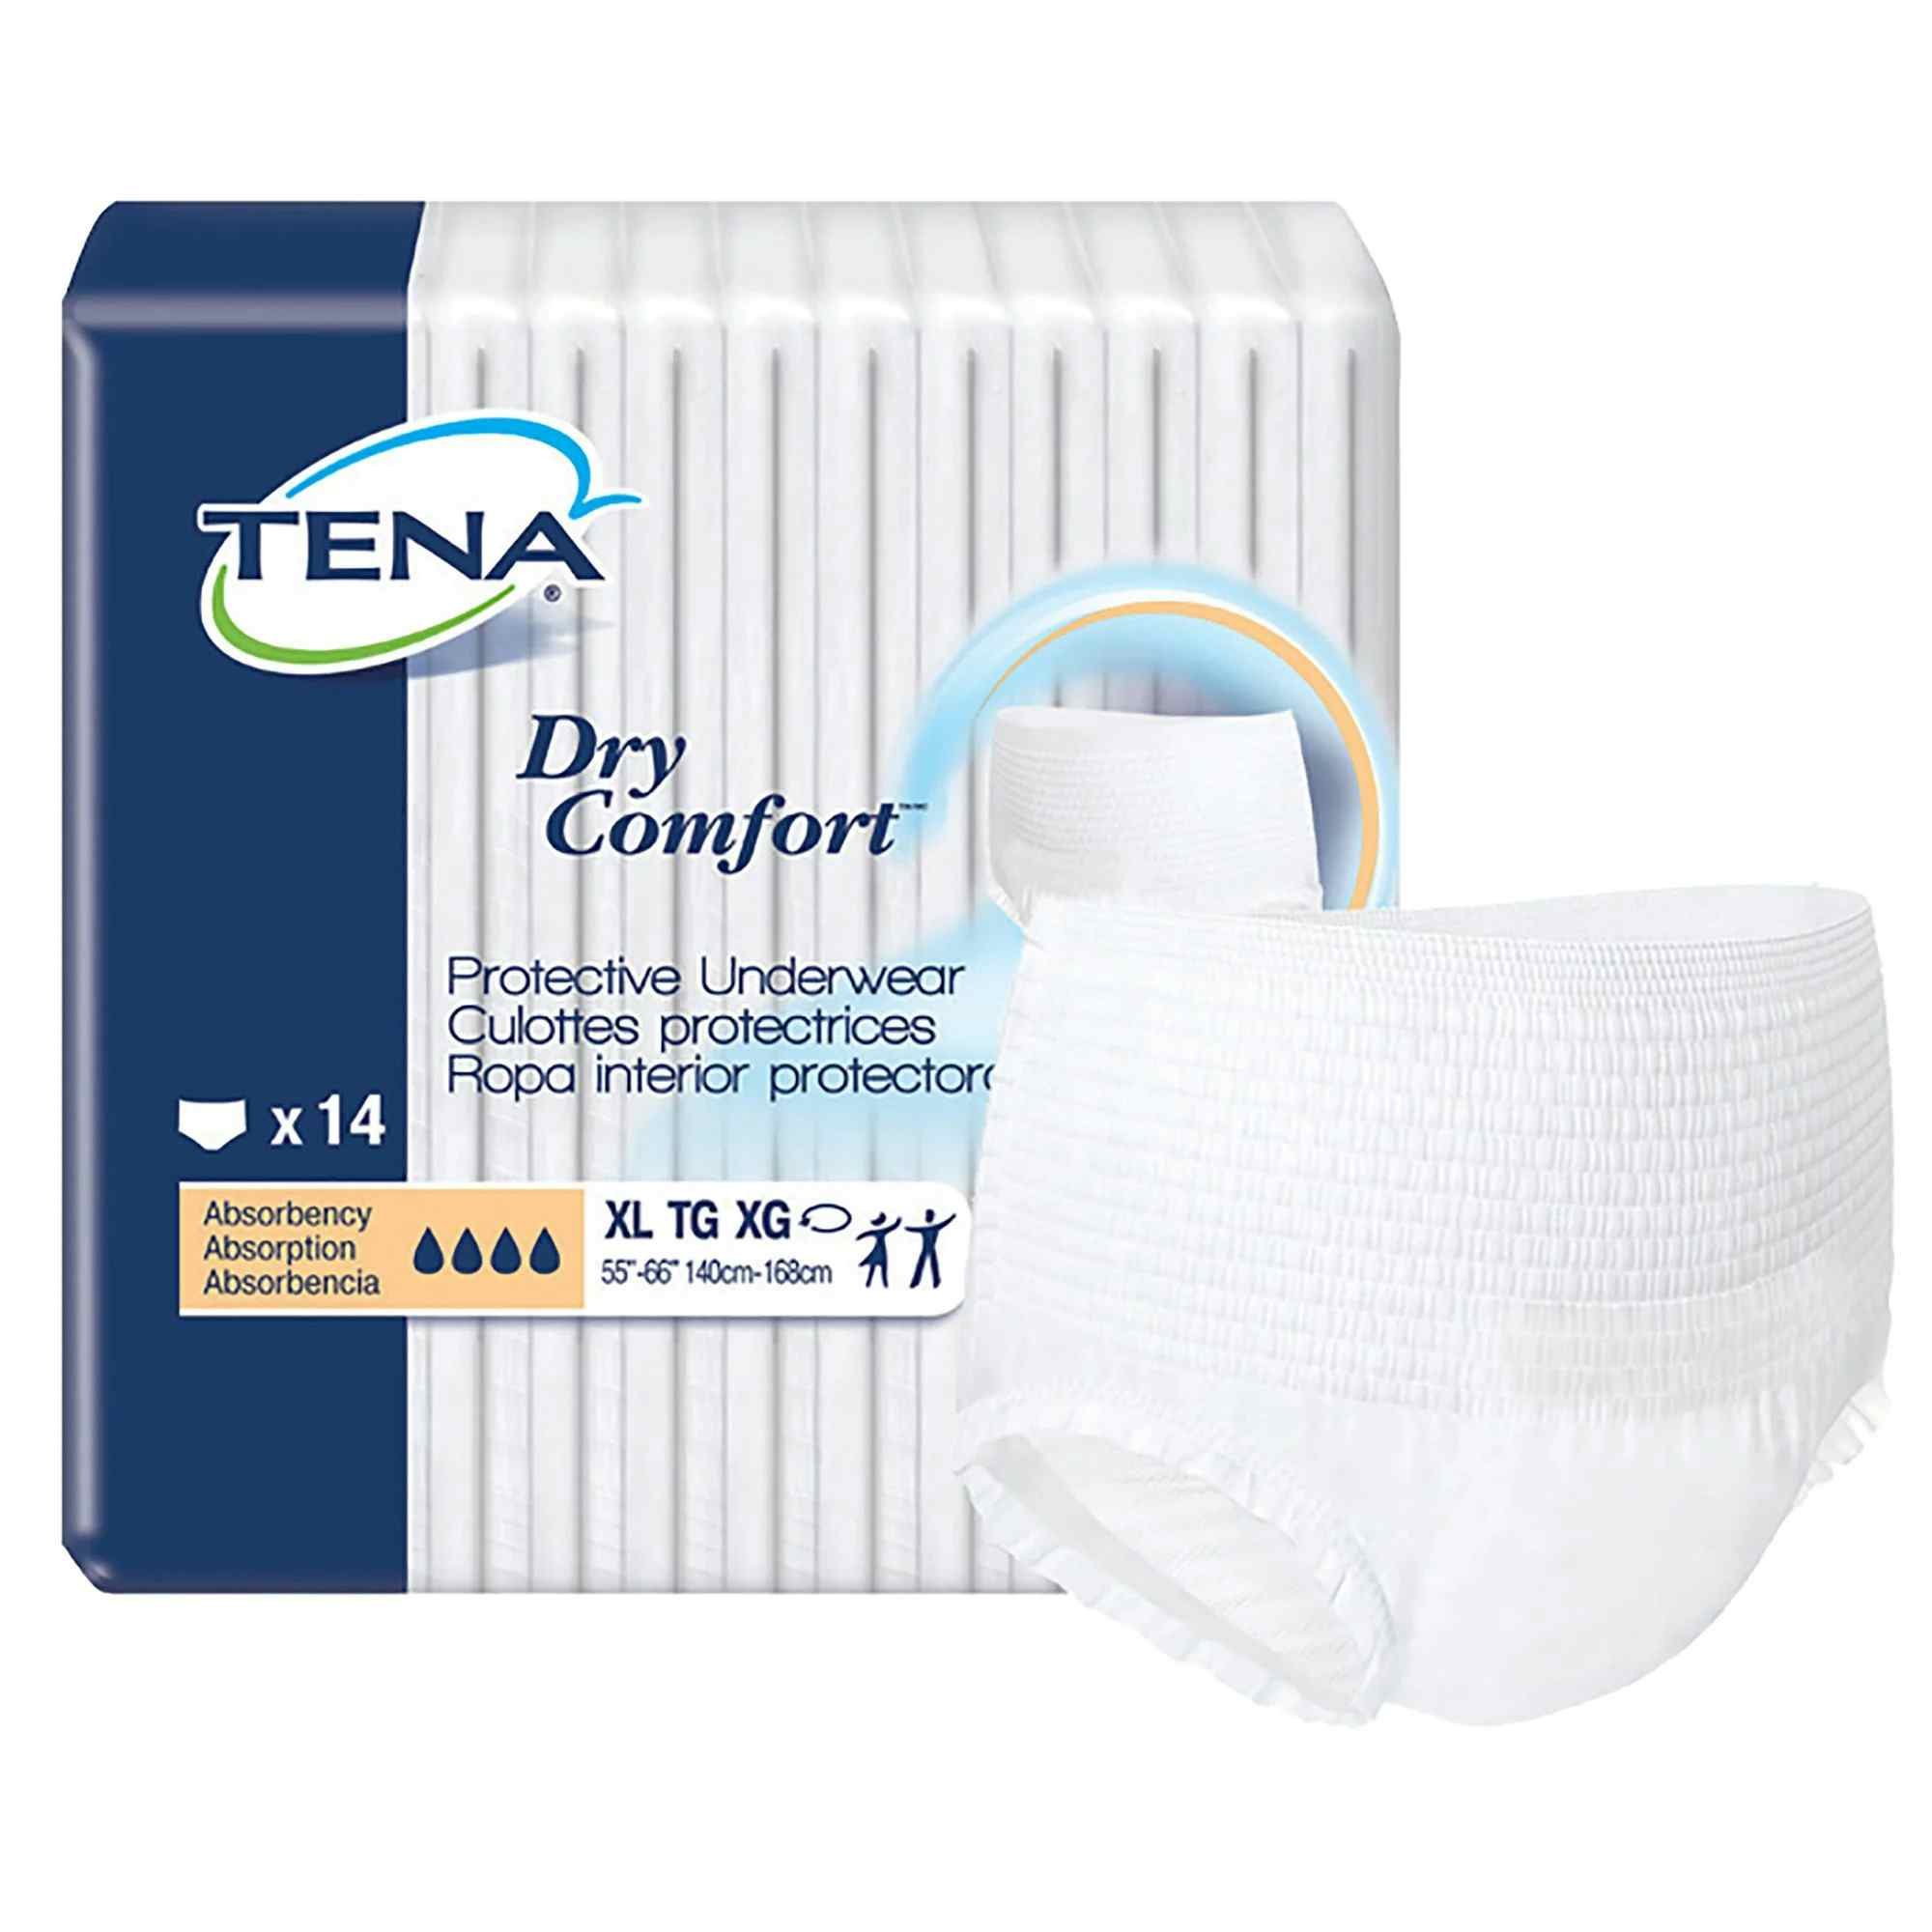 TENA Dry Comfort Protective Incontinence Underwear, Moderate Absorbency